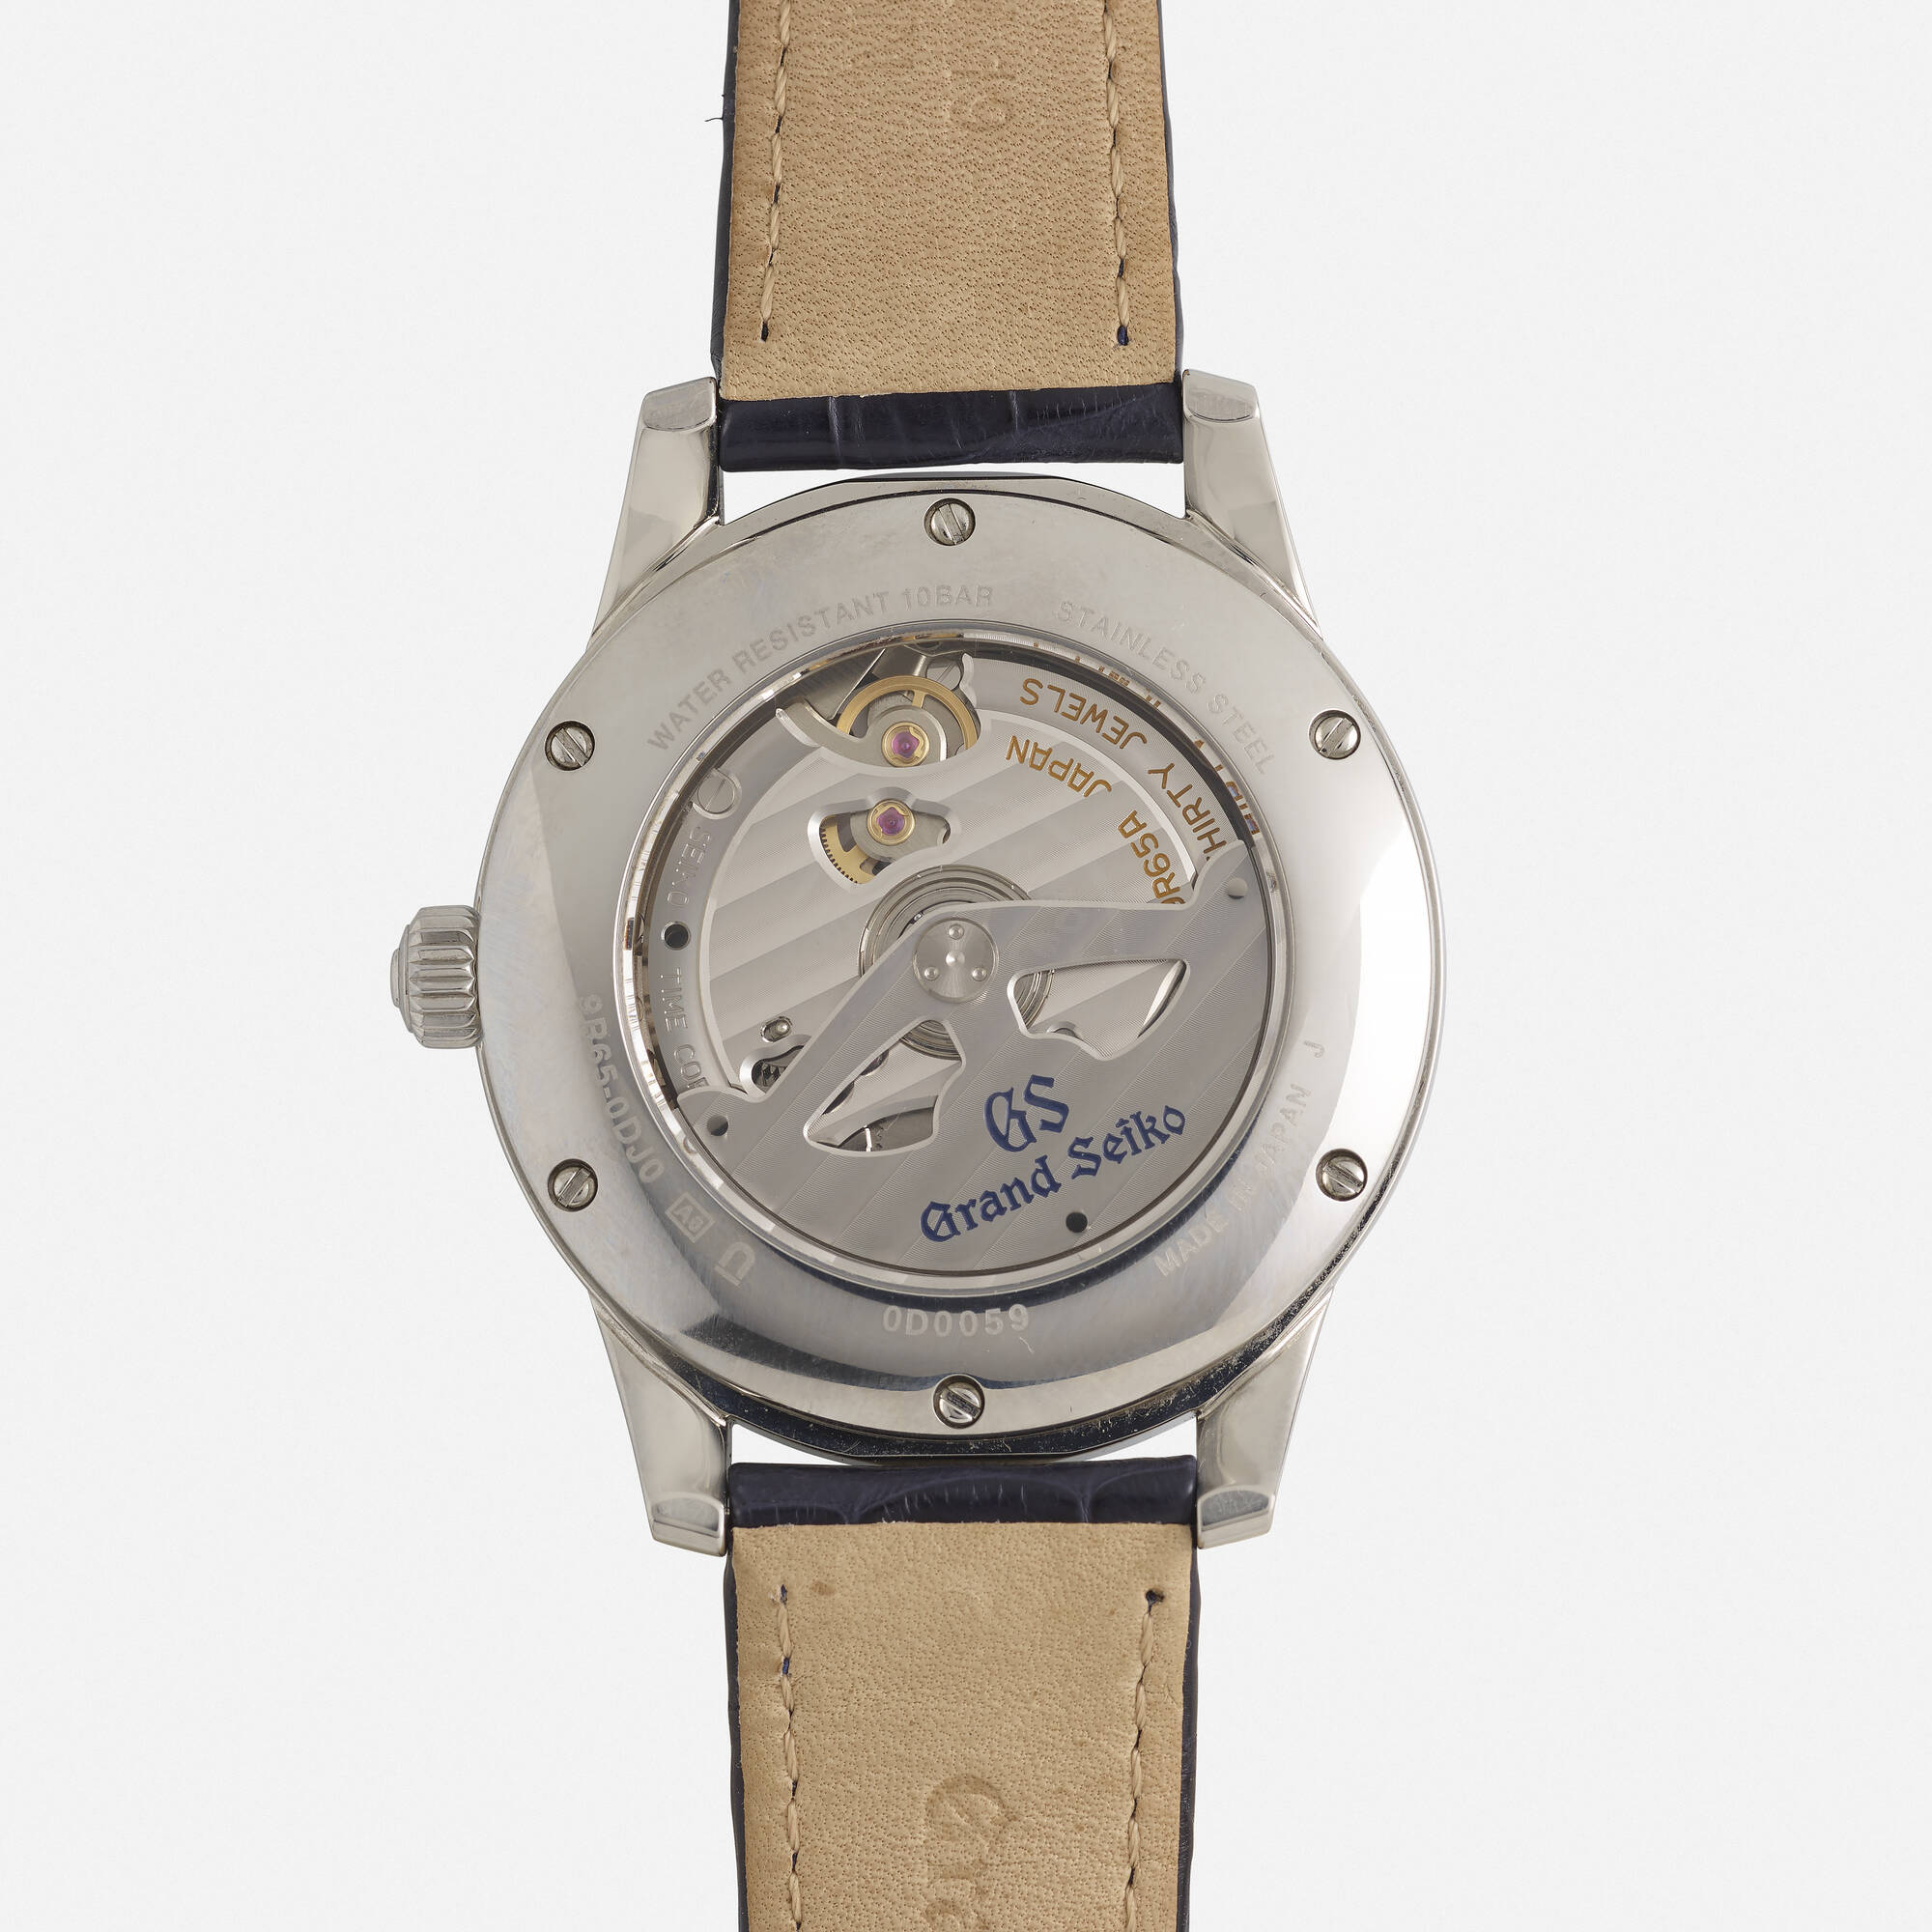 159: GRAND SEIKO, 'Skyflake' stainless steel wristwatch, Ref. SBGA407 <  Watches, 5 May 2022 < Auctions | Wright: Auctions of Art and Design